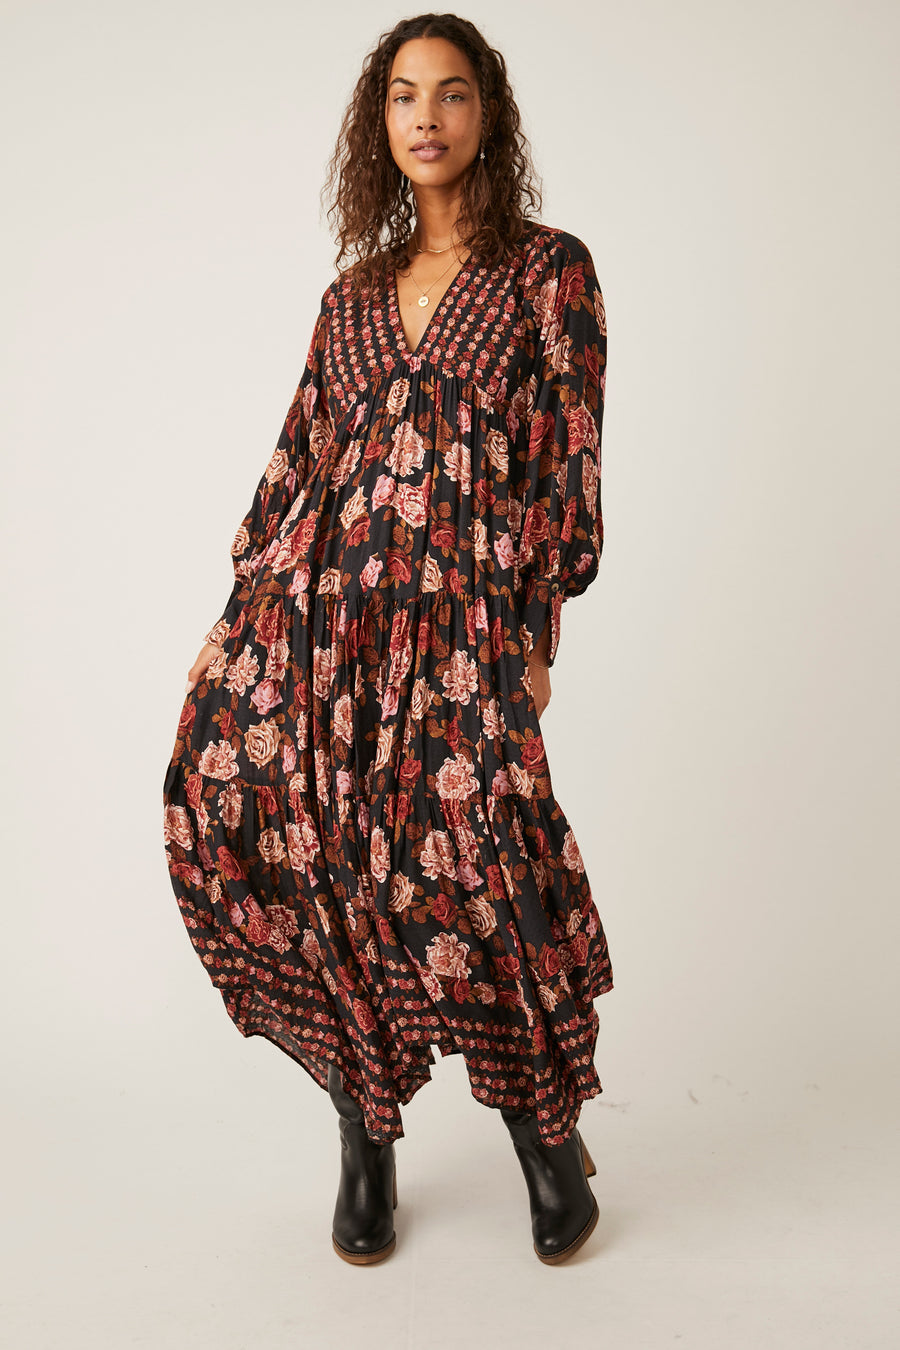 Rows of Roses Maxi